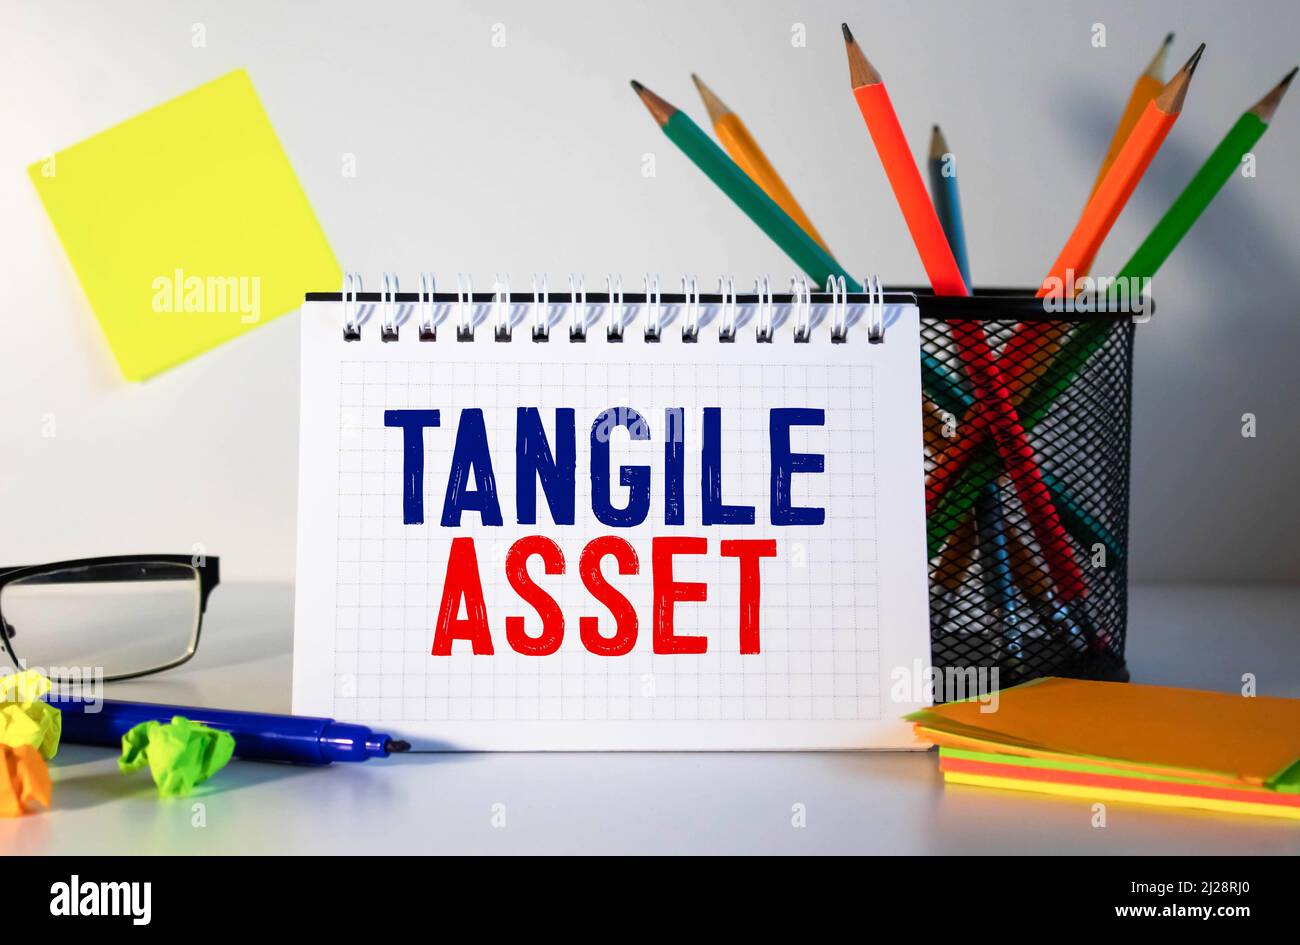 Tangible Asset text written on a notebook with pencils. Stock Photo